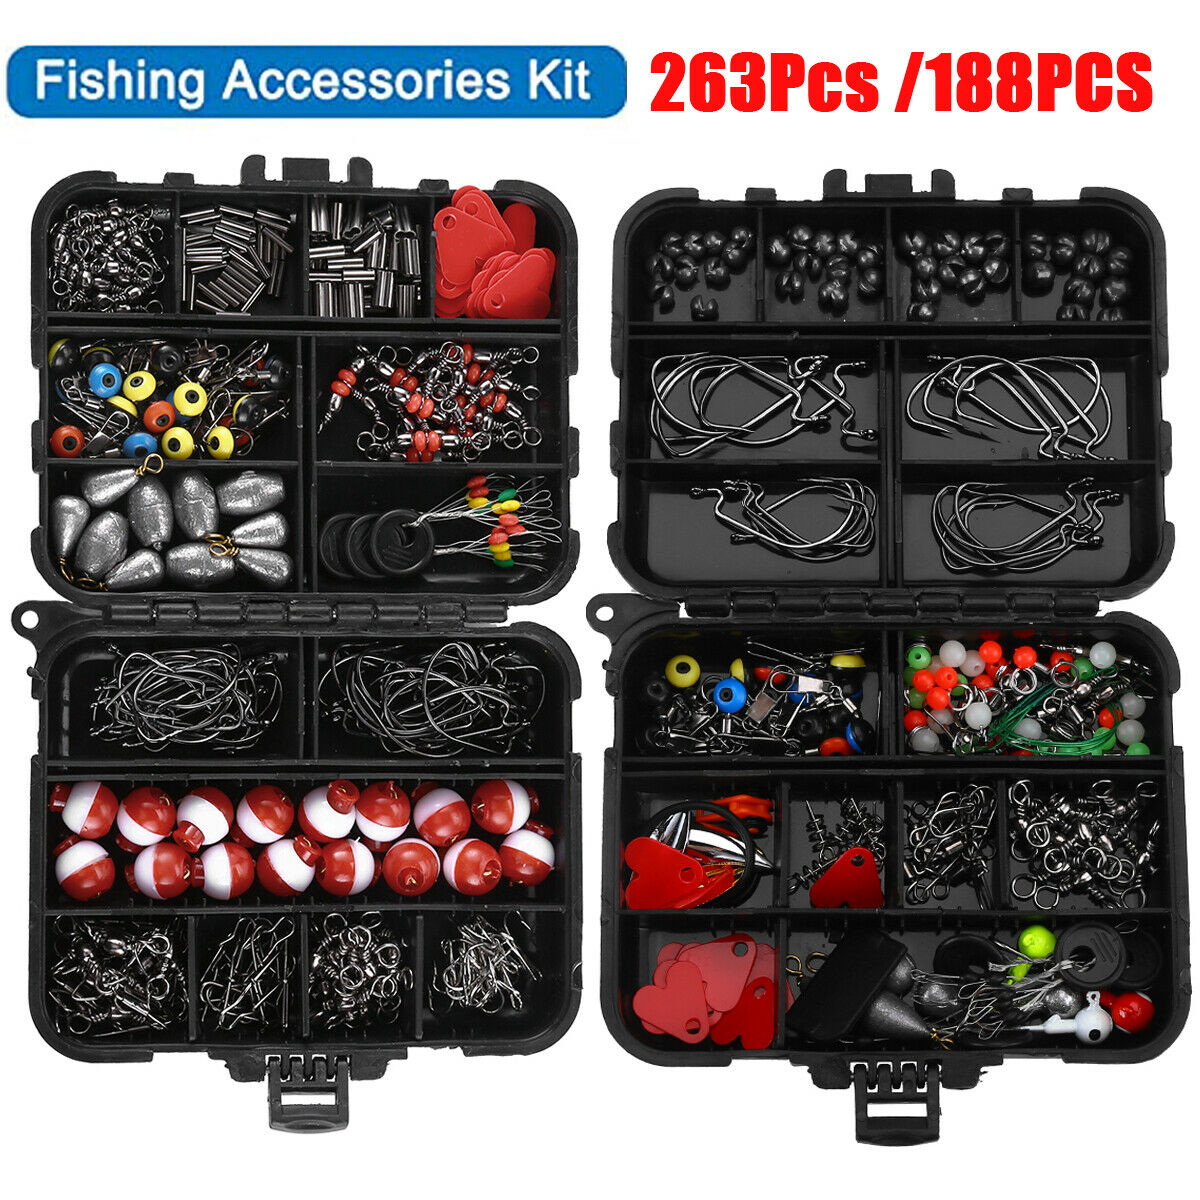 263/188pcs Fishing Accessories Kit Set With Tackle Box Pliers Jig Hooks Bullet